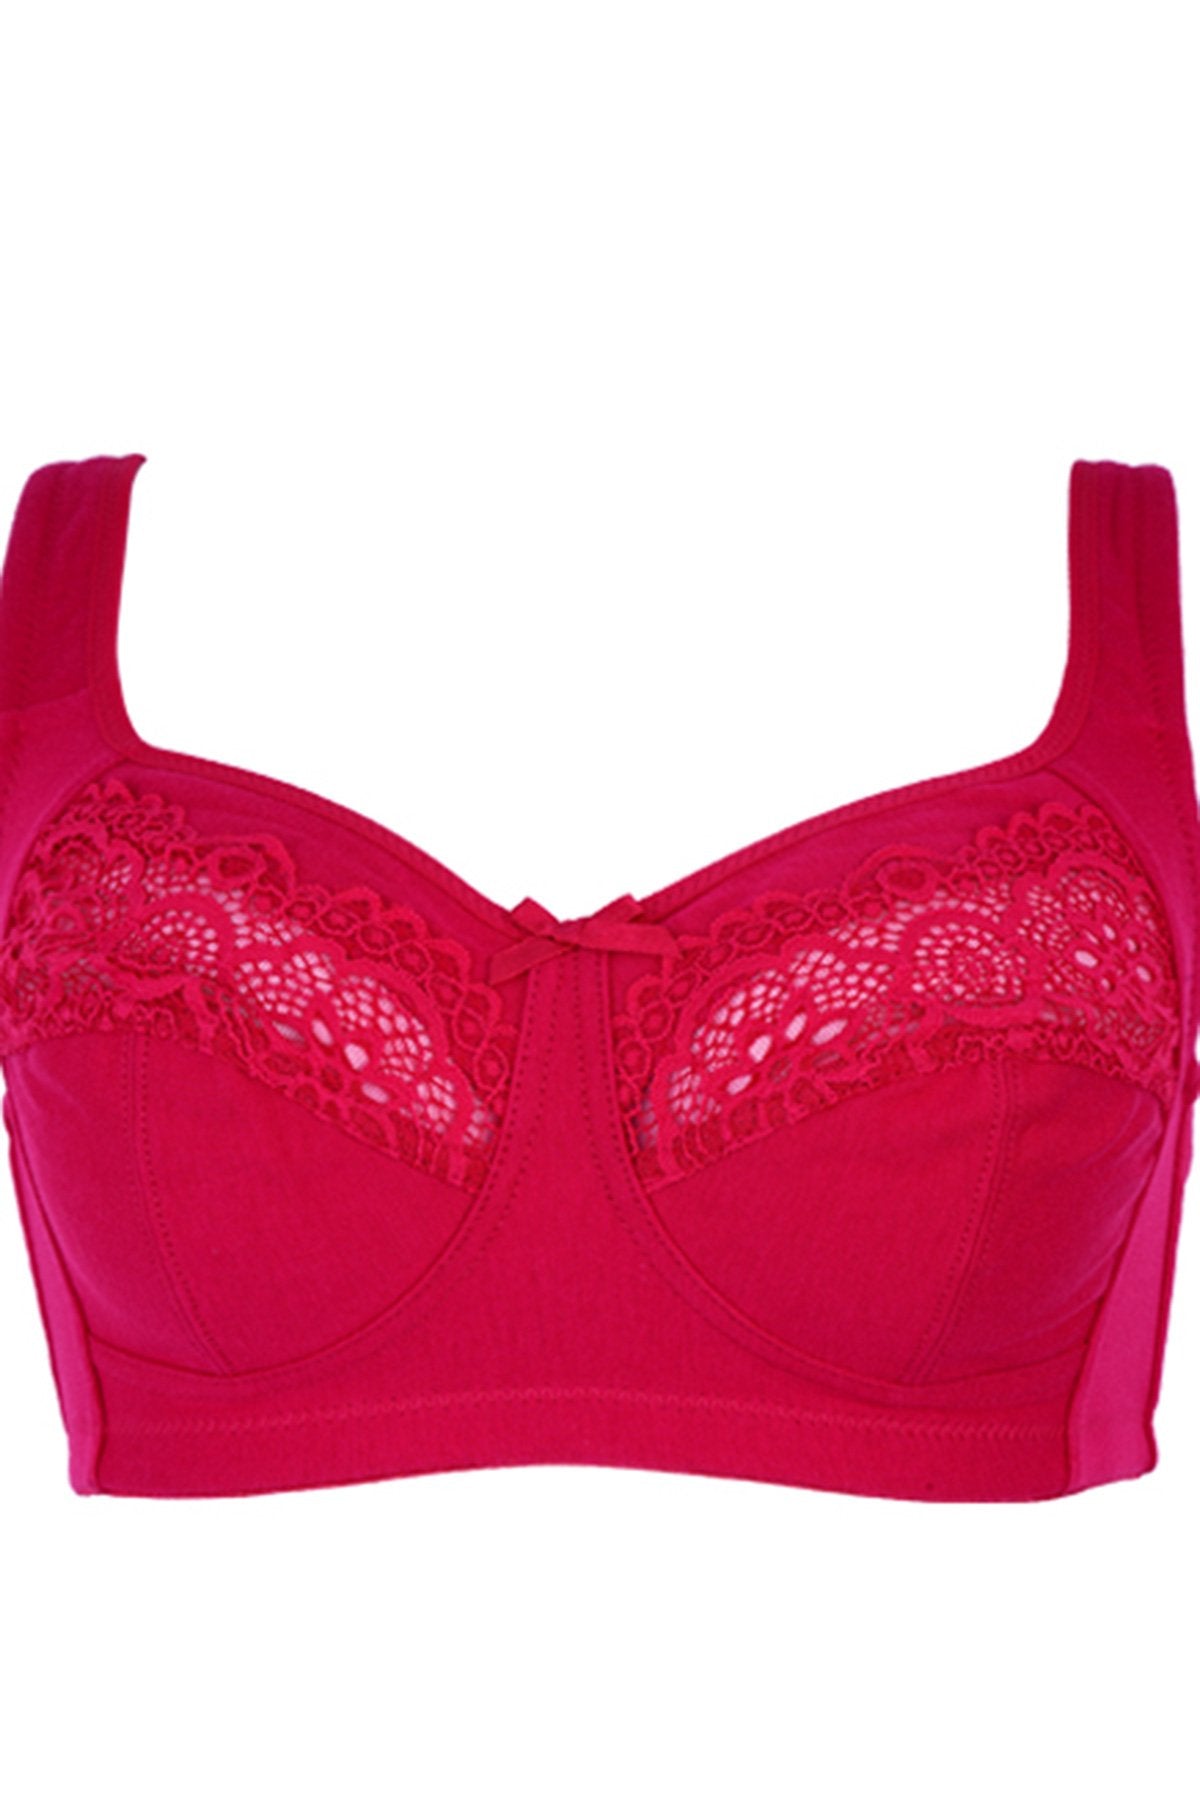 Broderie Anglaise Non-Wired Full Cup Bra by Miss Mary of Sweden